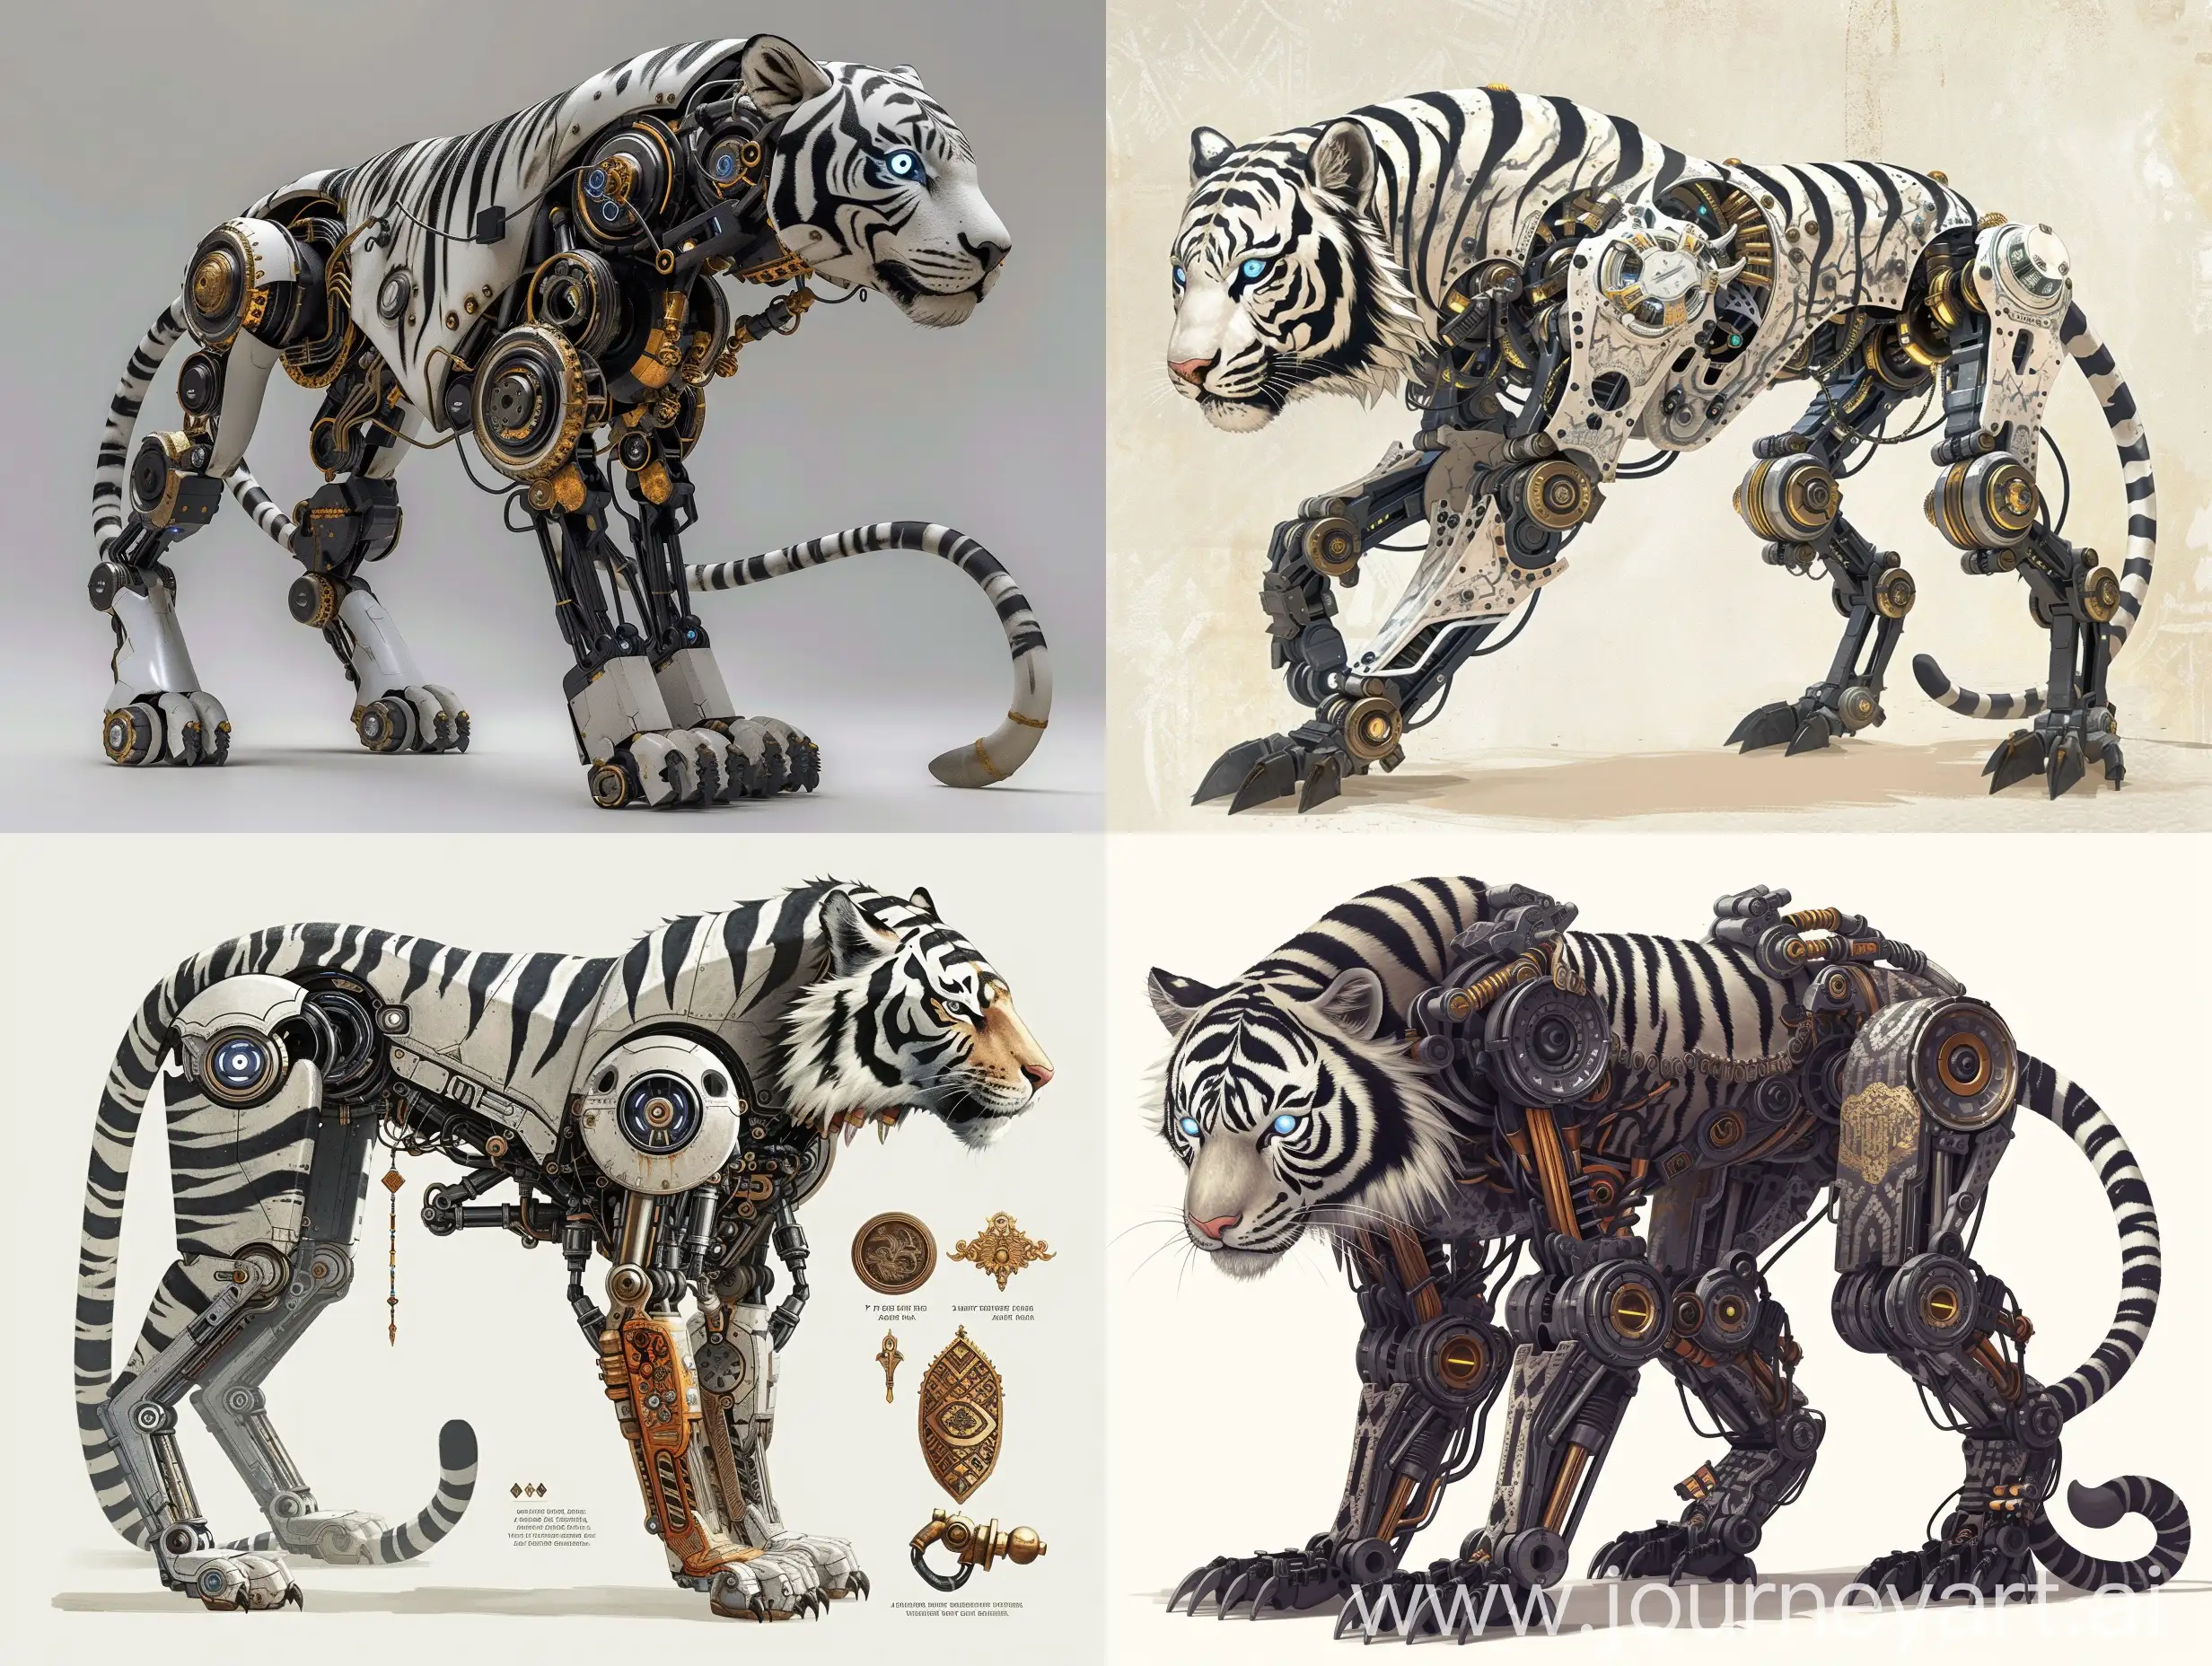 1. **The head of the Sundanese robotic tiger **:
   - The head of the Sundanese robotic tiger with its characteristic black and white stripes.
   - Add robotic elements such as blinking LED lights in the eyes to showcase intelligence and technology.

2. **Body**:
   - A strong and muscular body design, portraying strength and bravery.
   - There is an outer layer resembling metal skin to indicate the robotic aspect.

3. **Legs and Claws**:
   - Sturdy legs with sharp claws, symbolizing courage and toughness.
   - Legs could be equipped with mechanical elements or wheels to enhance the robotic impression.

4. **Tail**:
   - A long and powerful tail, reflecting gracefulness and agility.
   - Additional elements such as hinges or joints could be added to increase dynamics in the tail.

5. **Additional Details**:
   - Incorporate traditional accents from West Java such as batik motifs or golden ornaments to provide a cultural touch.
   - Include accessories like masks or traditional jewelry that complement the theme of West Javanese customs.